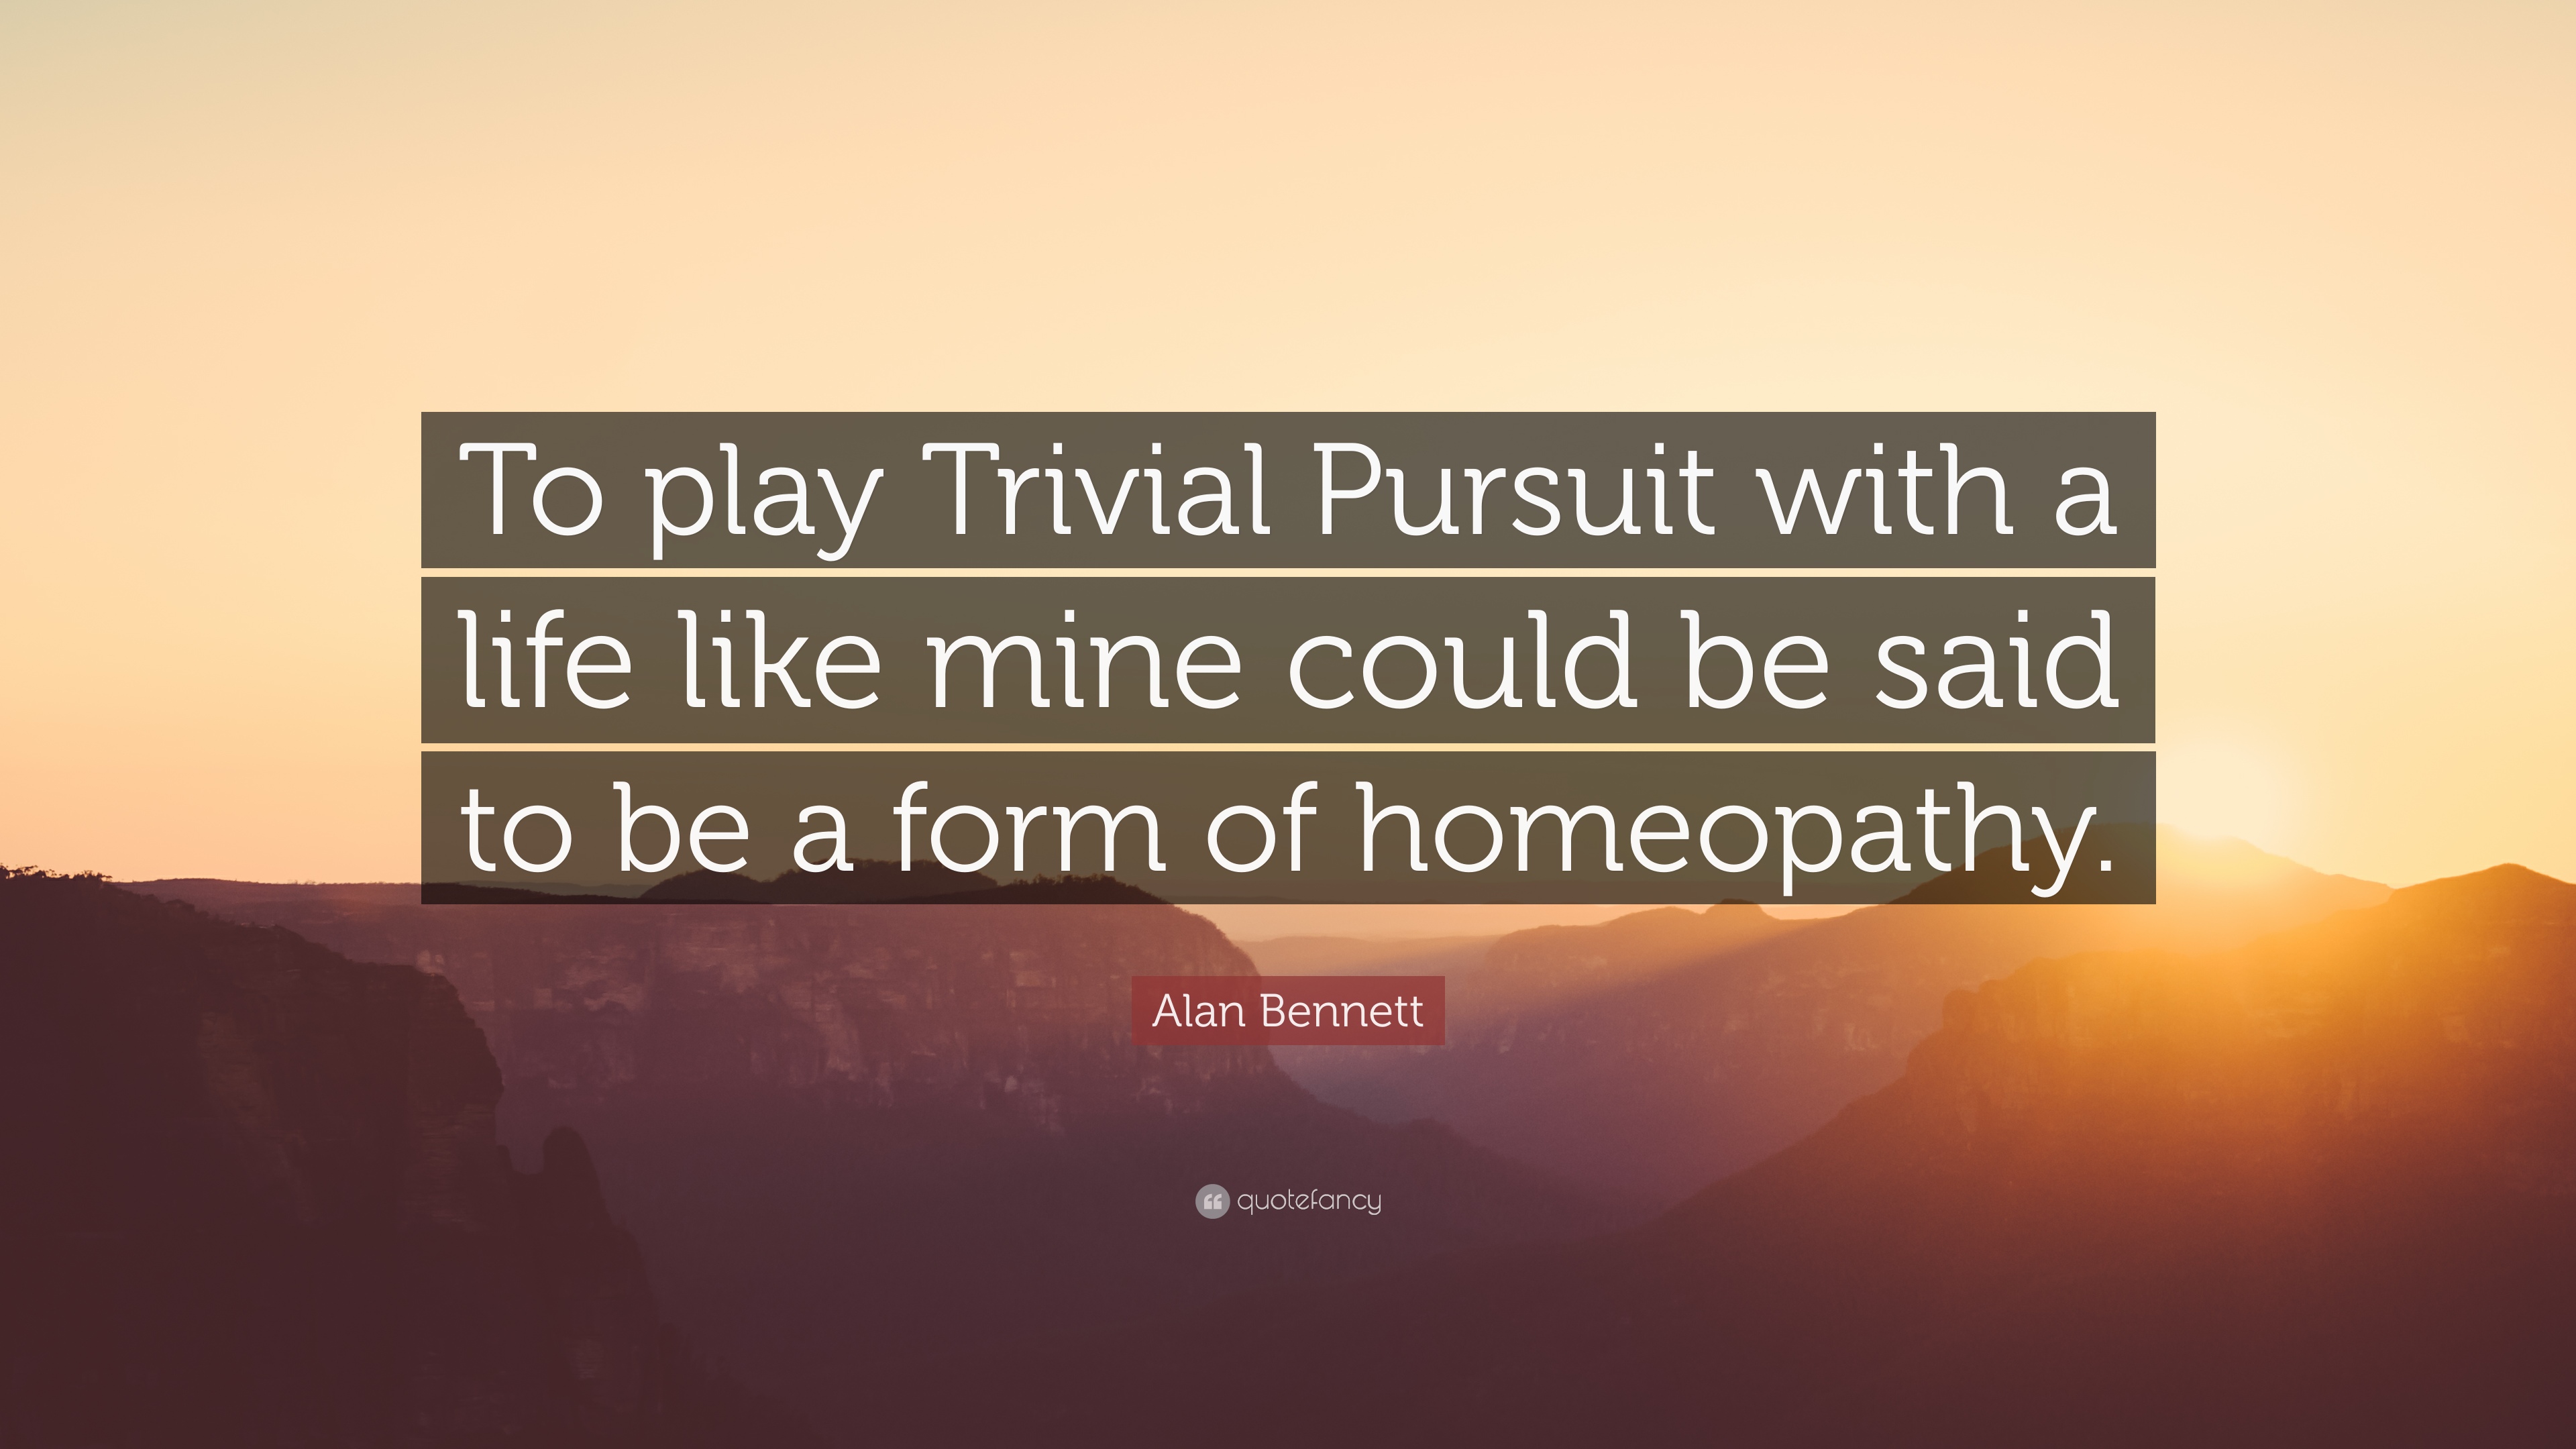 Alan Bennett Quote: “To play Trivial Pursuit with a life like mine ...